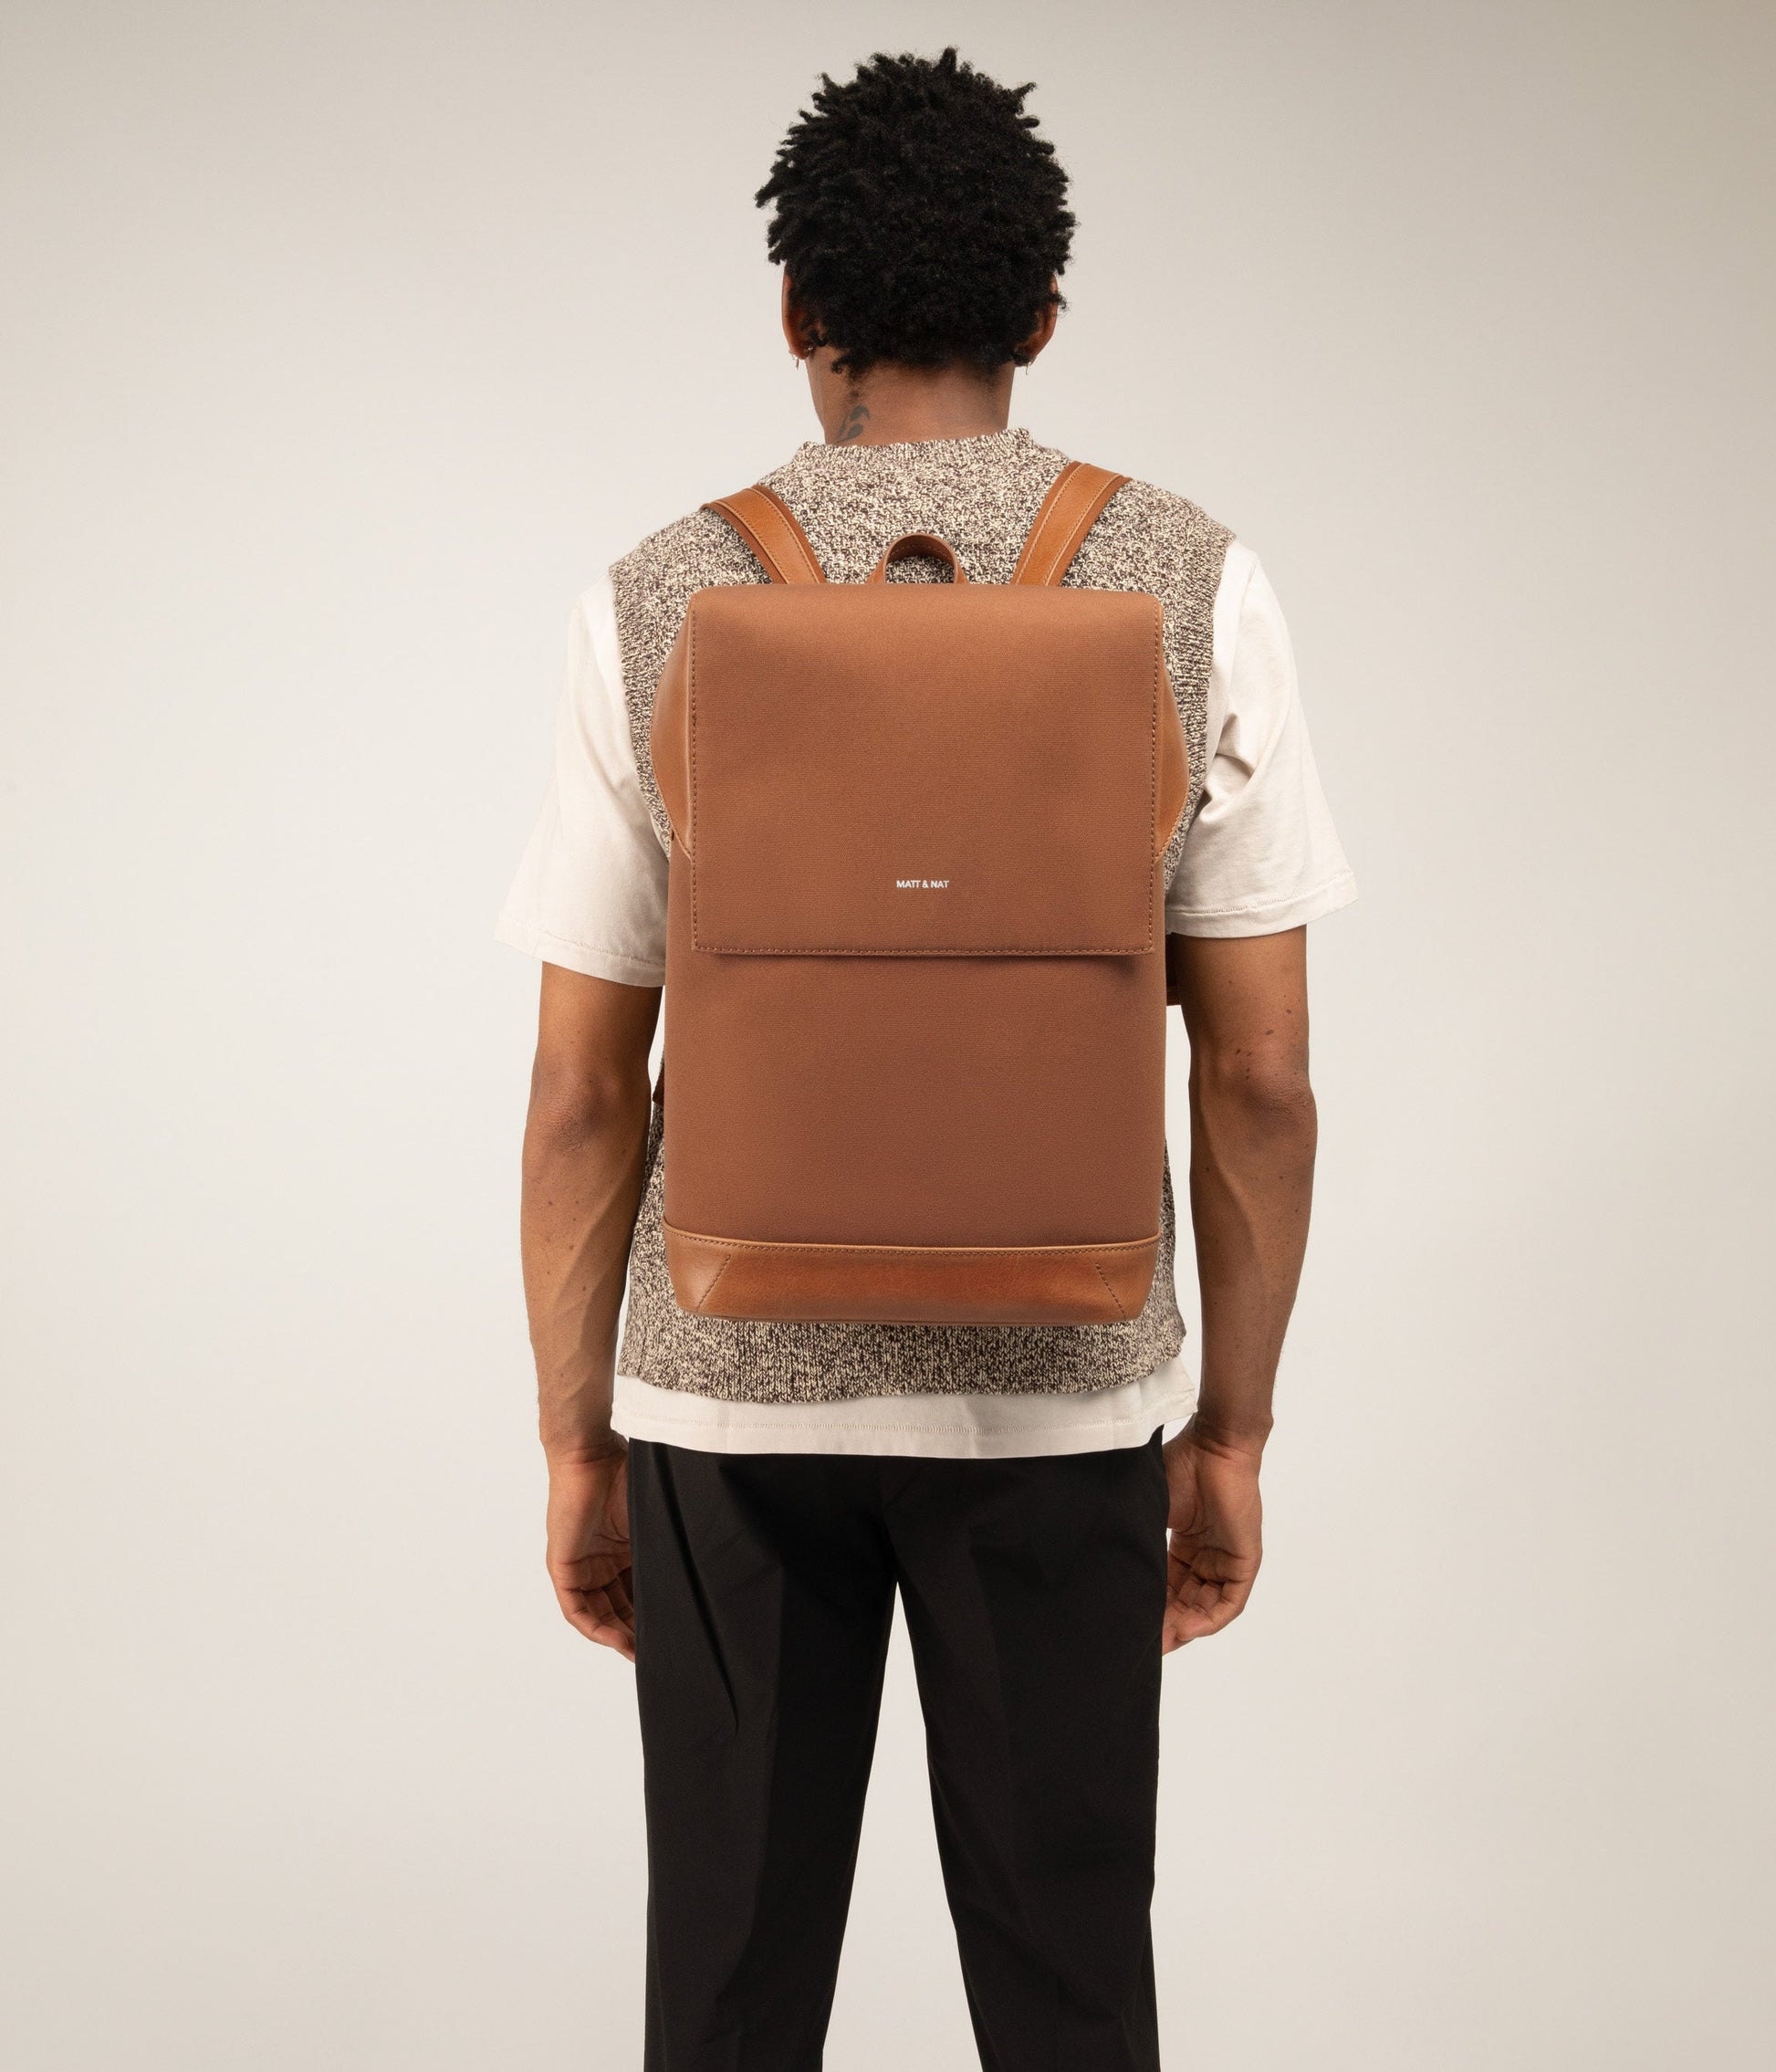 HOXTON Vegan Backpack - Canvas | Color: Brown - variant::chili